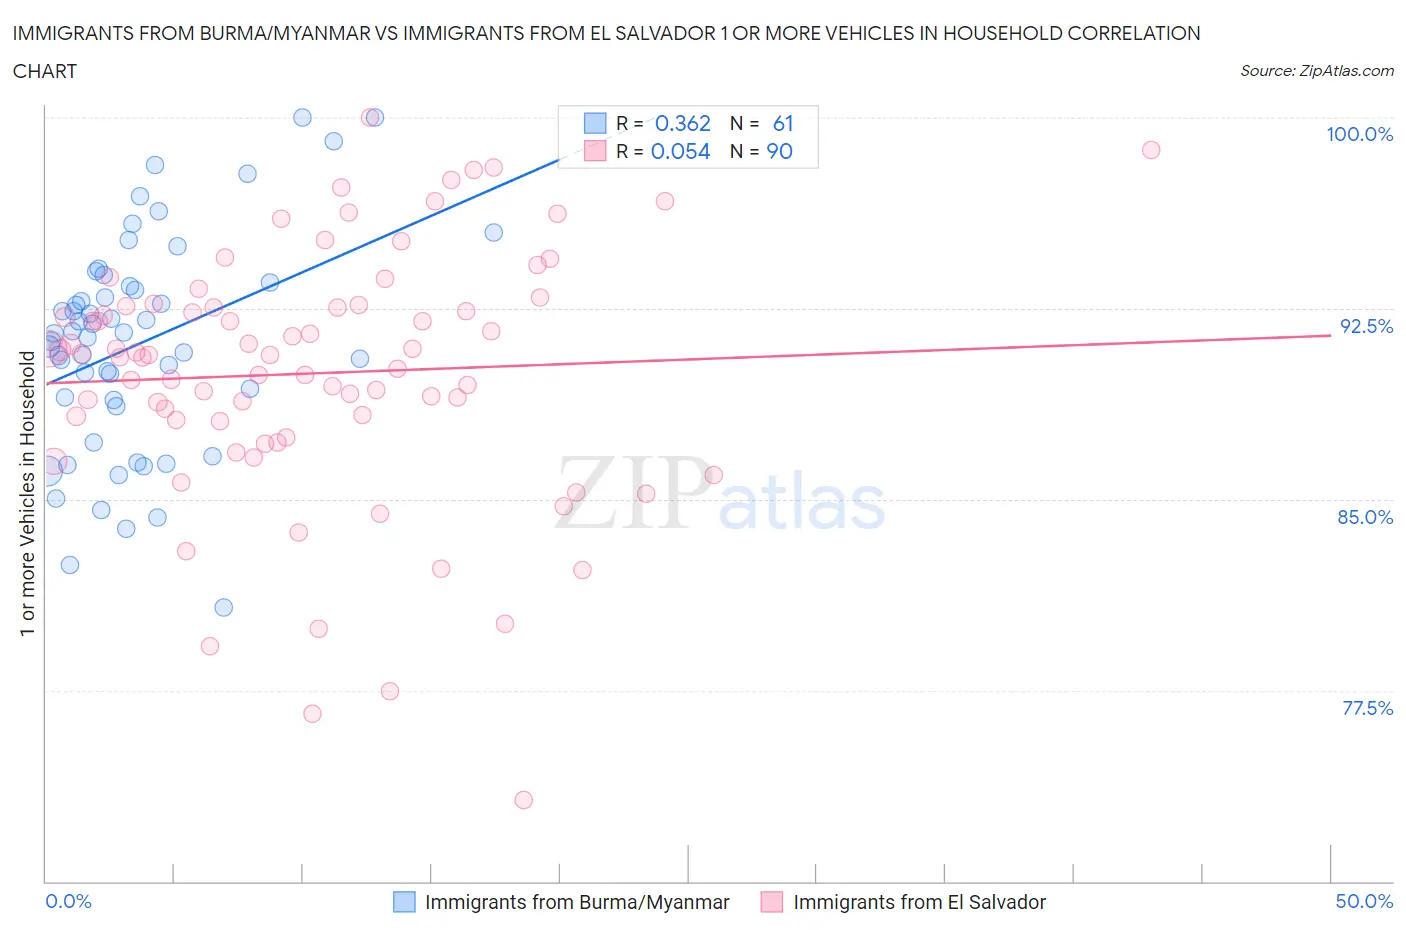 Immigrants from Burma/Myanmar vs Immigrants from El Salvador 1 or more Vehicles in Household